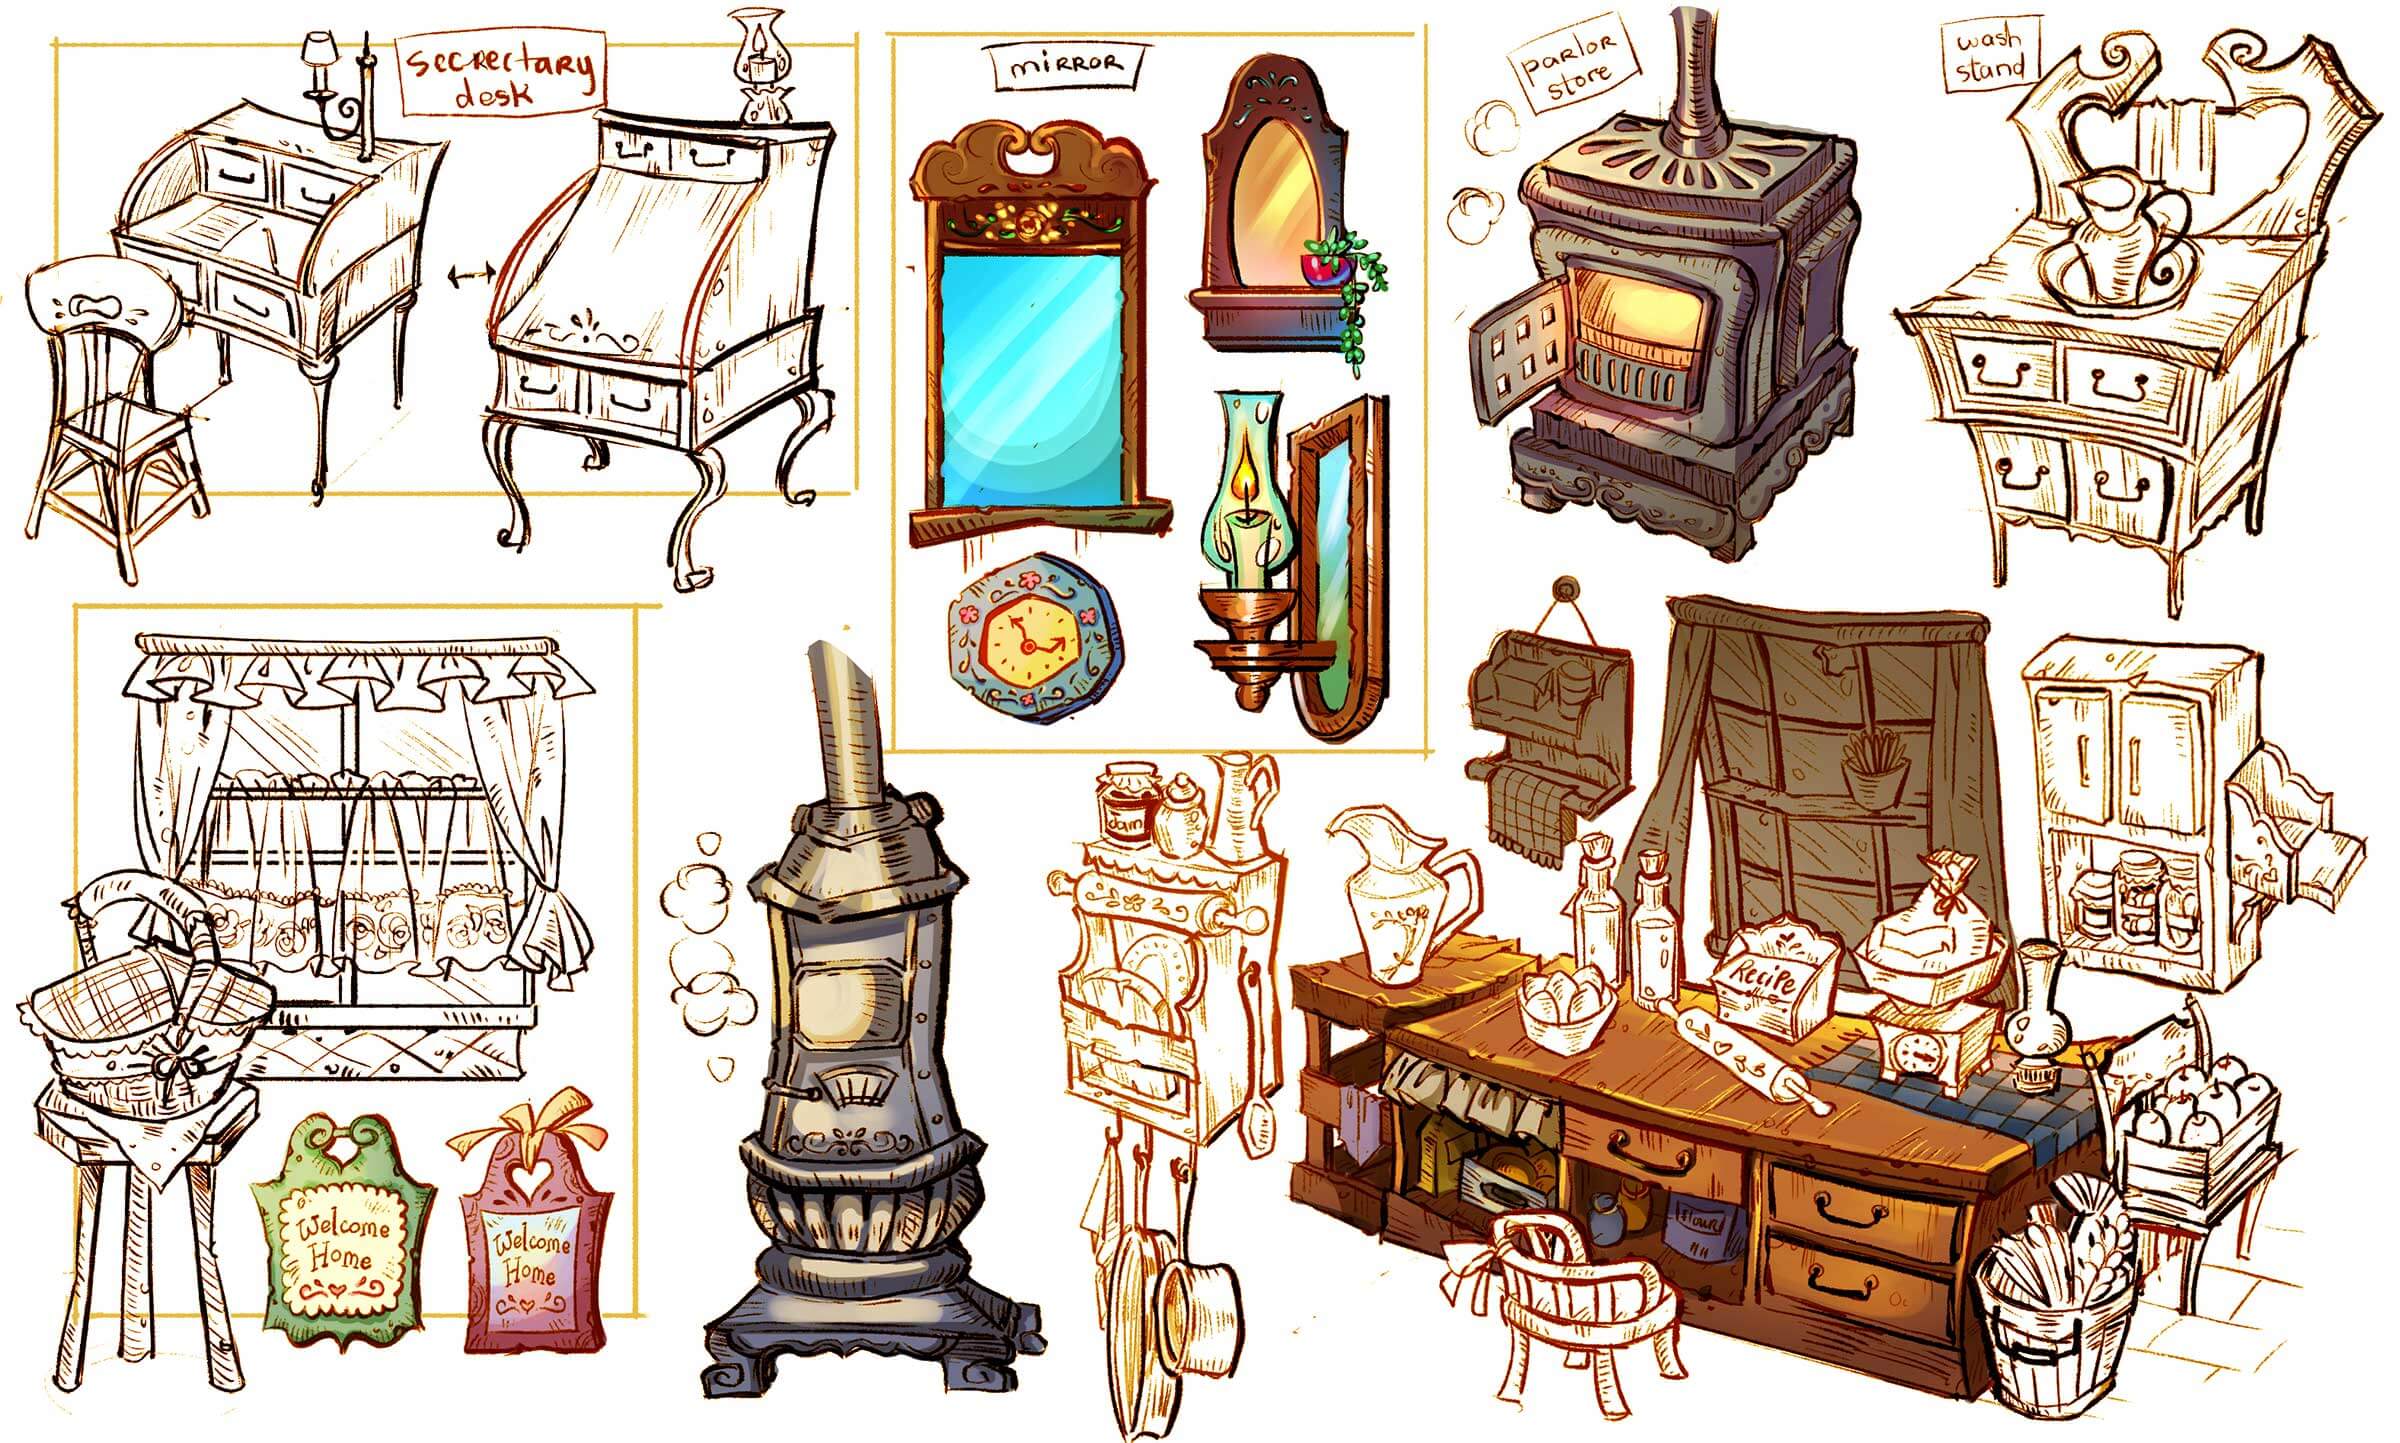 Drawings of various household furniture and appliances.